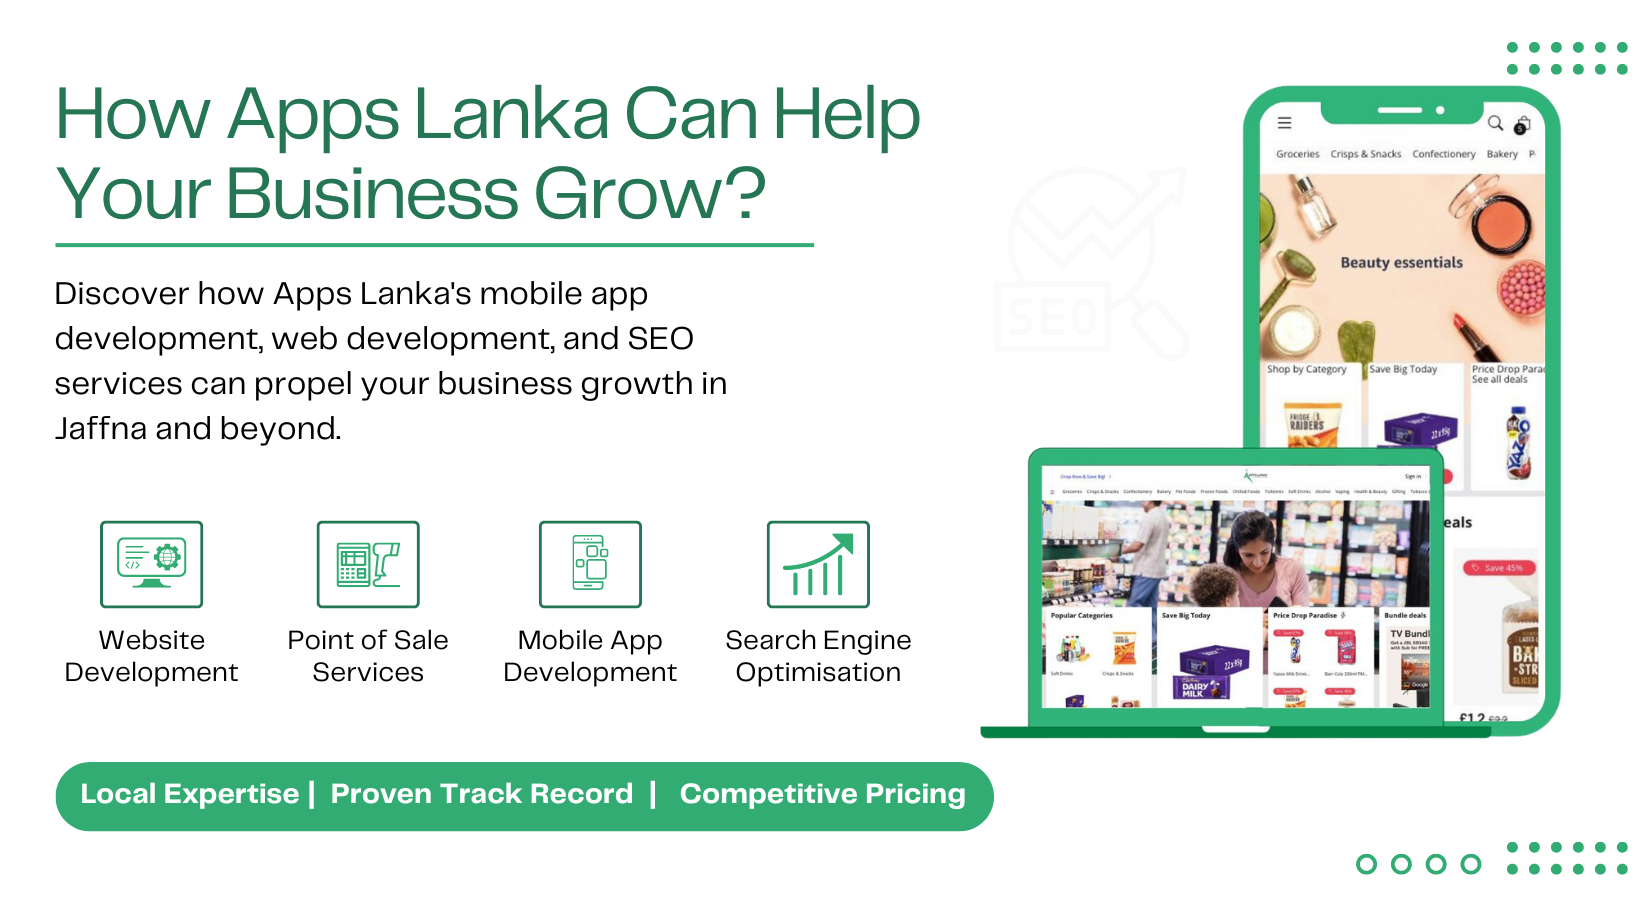 How Apps Lanka Software Solutions Can Help Your Business Grow